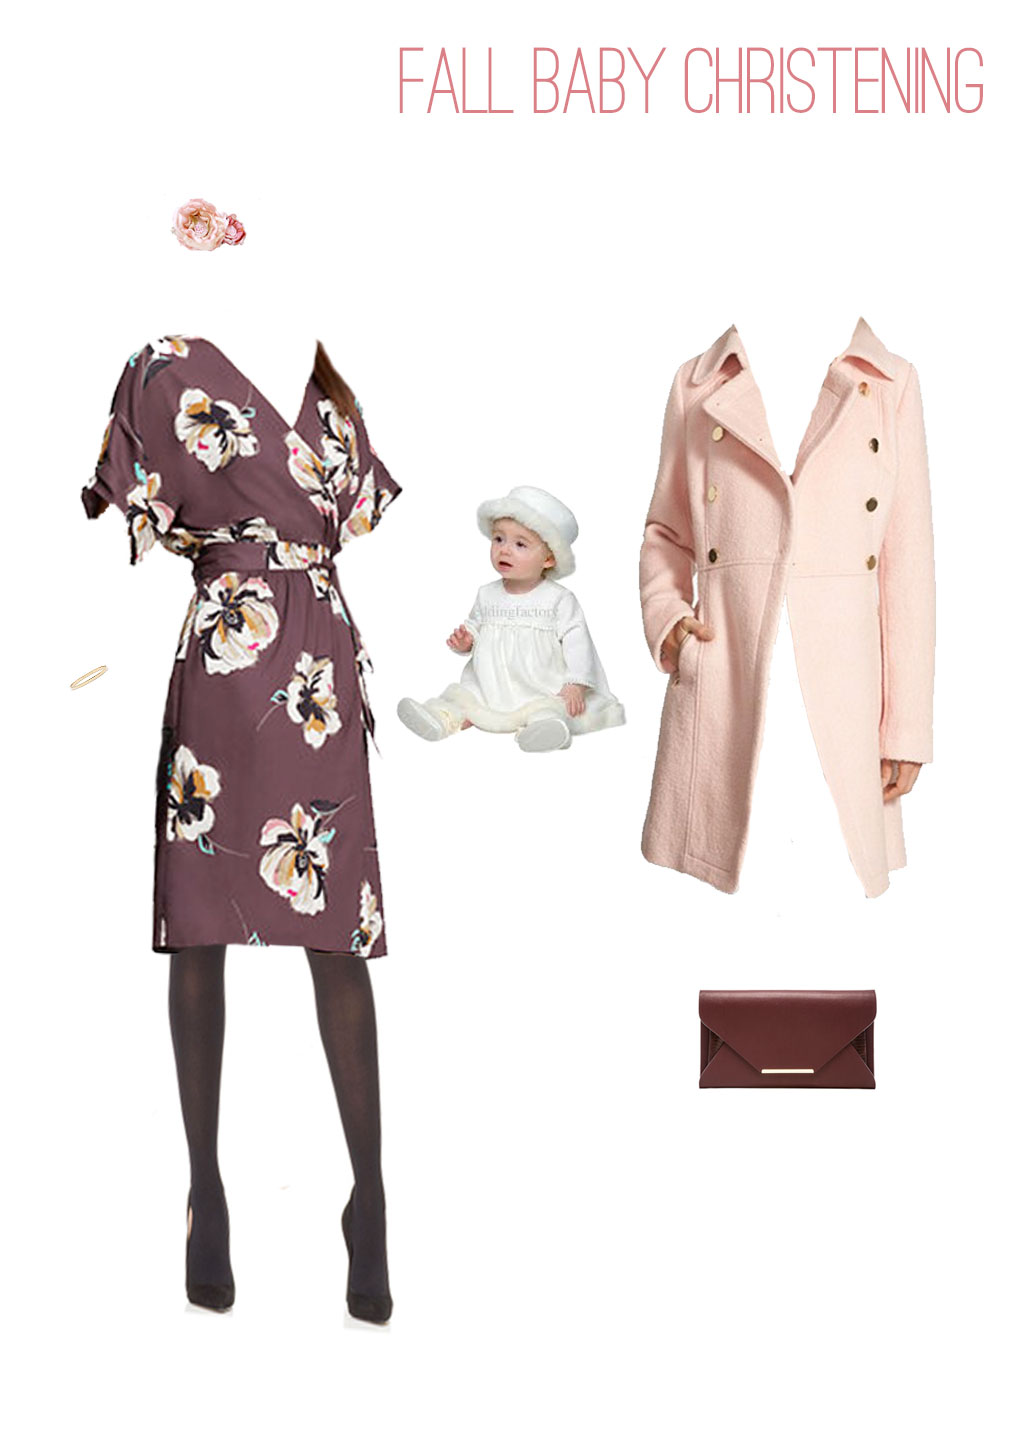 What to wear to a baby christening